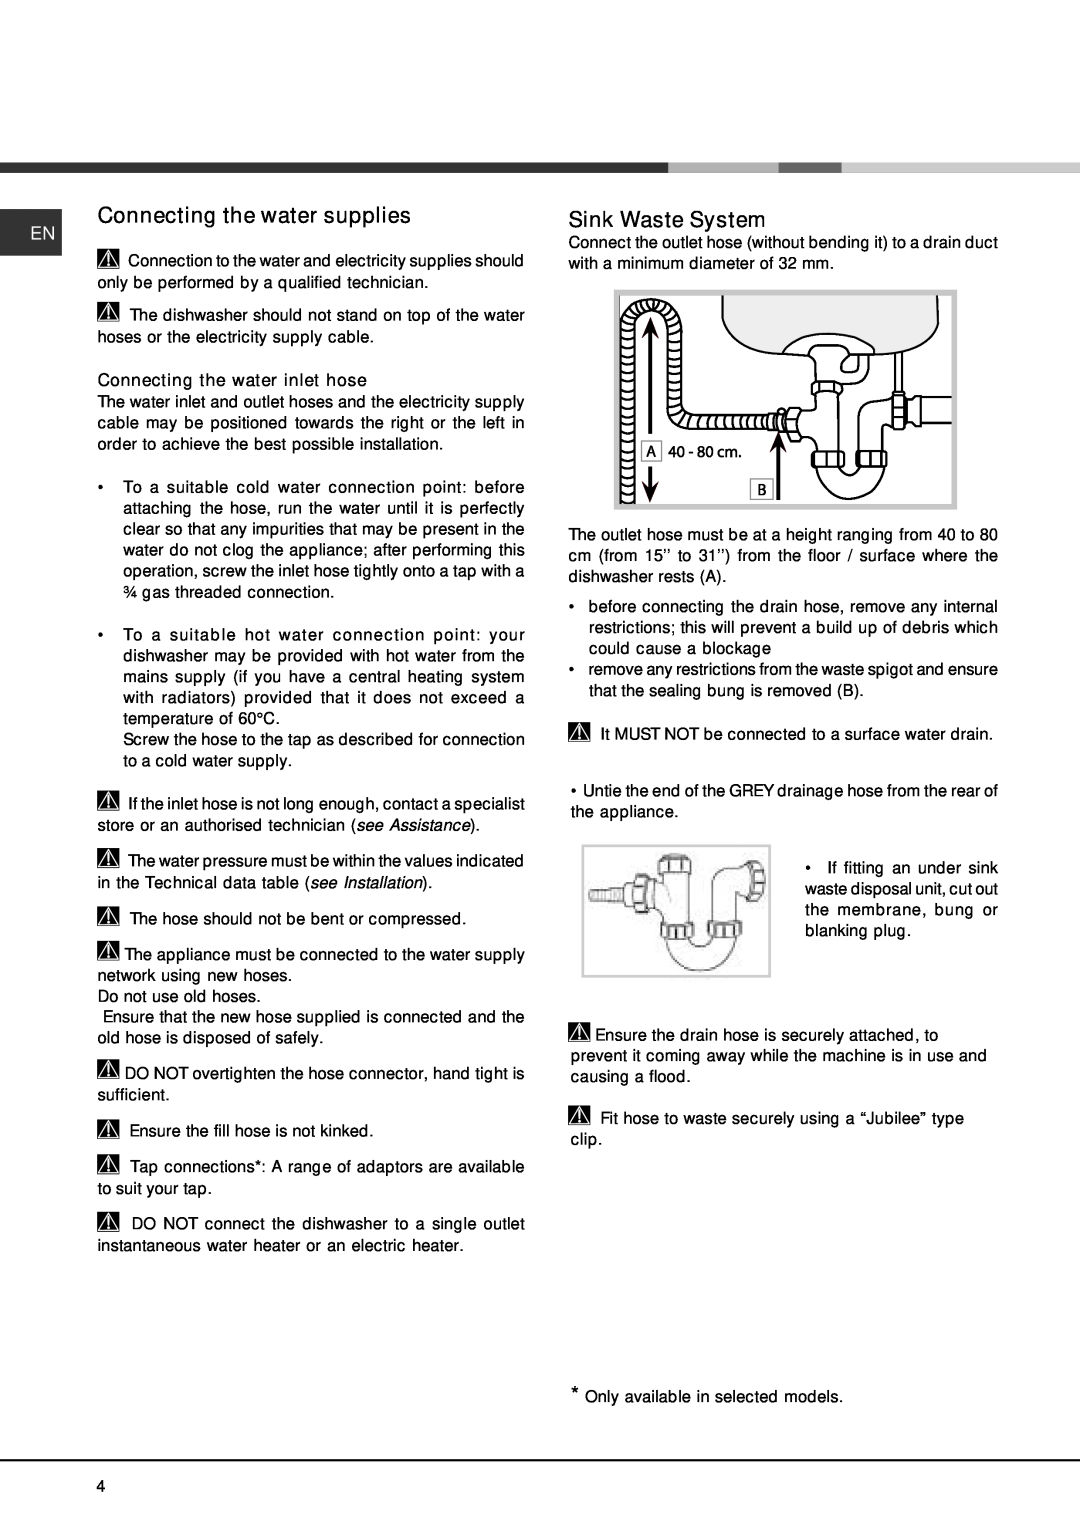 Hotpoint FDFF manual Connecting the water supplies, Sink Waste System, Connecting the water inlet hose 